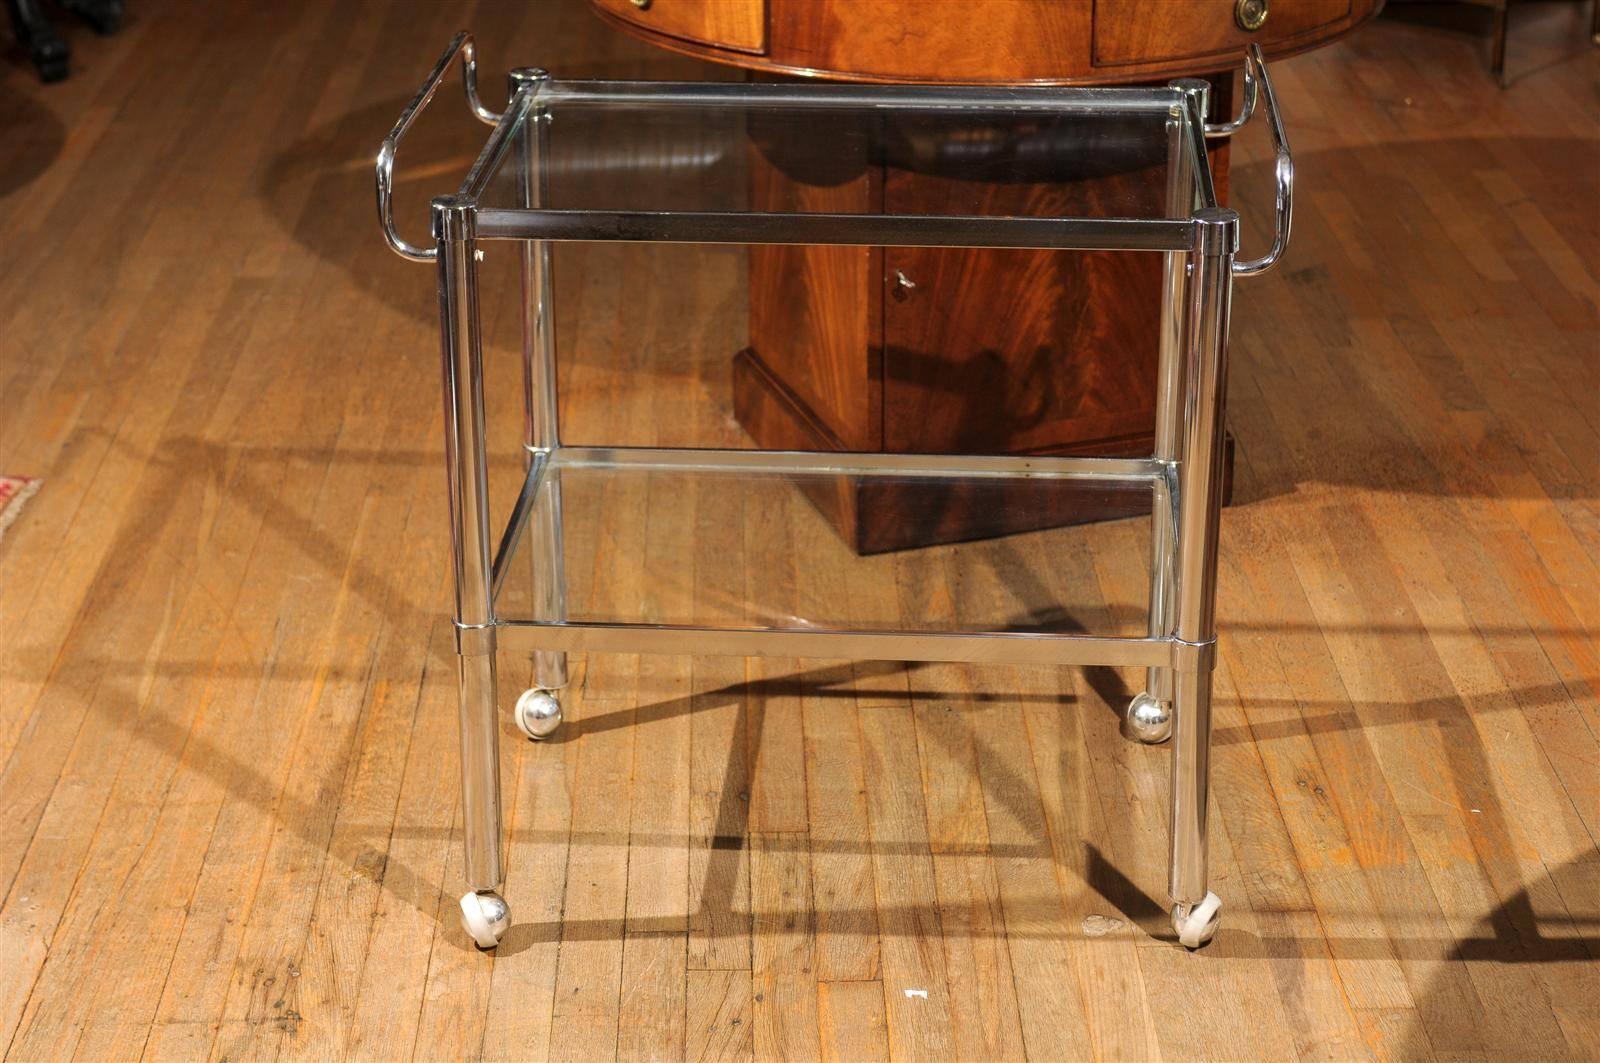 Midcentury bar cart of chrome having two tiers holding glass panels and upturned handles on either side.  The cart is raised on wheels and the upper tier raises off of the lower making it easier to store or ship.  